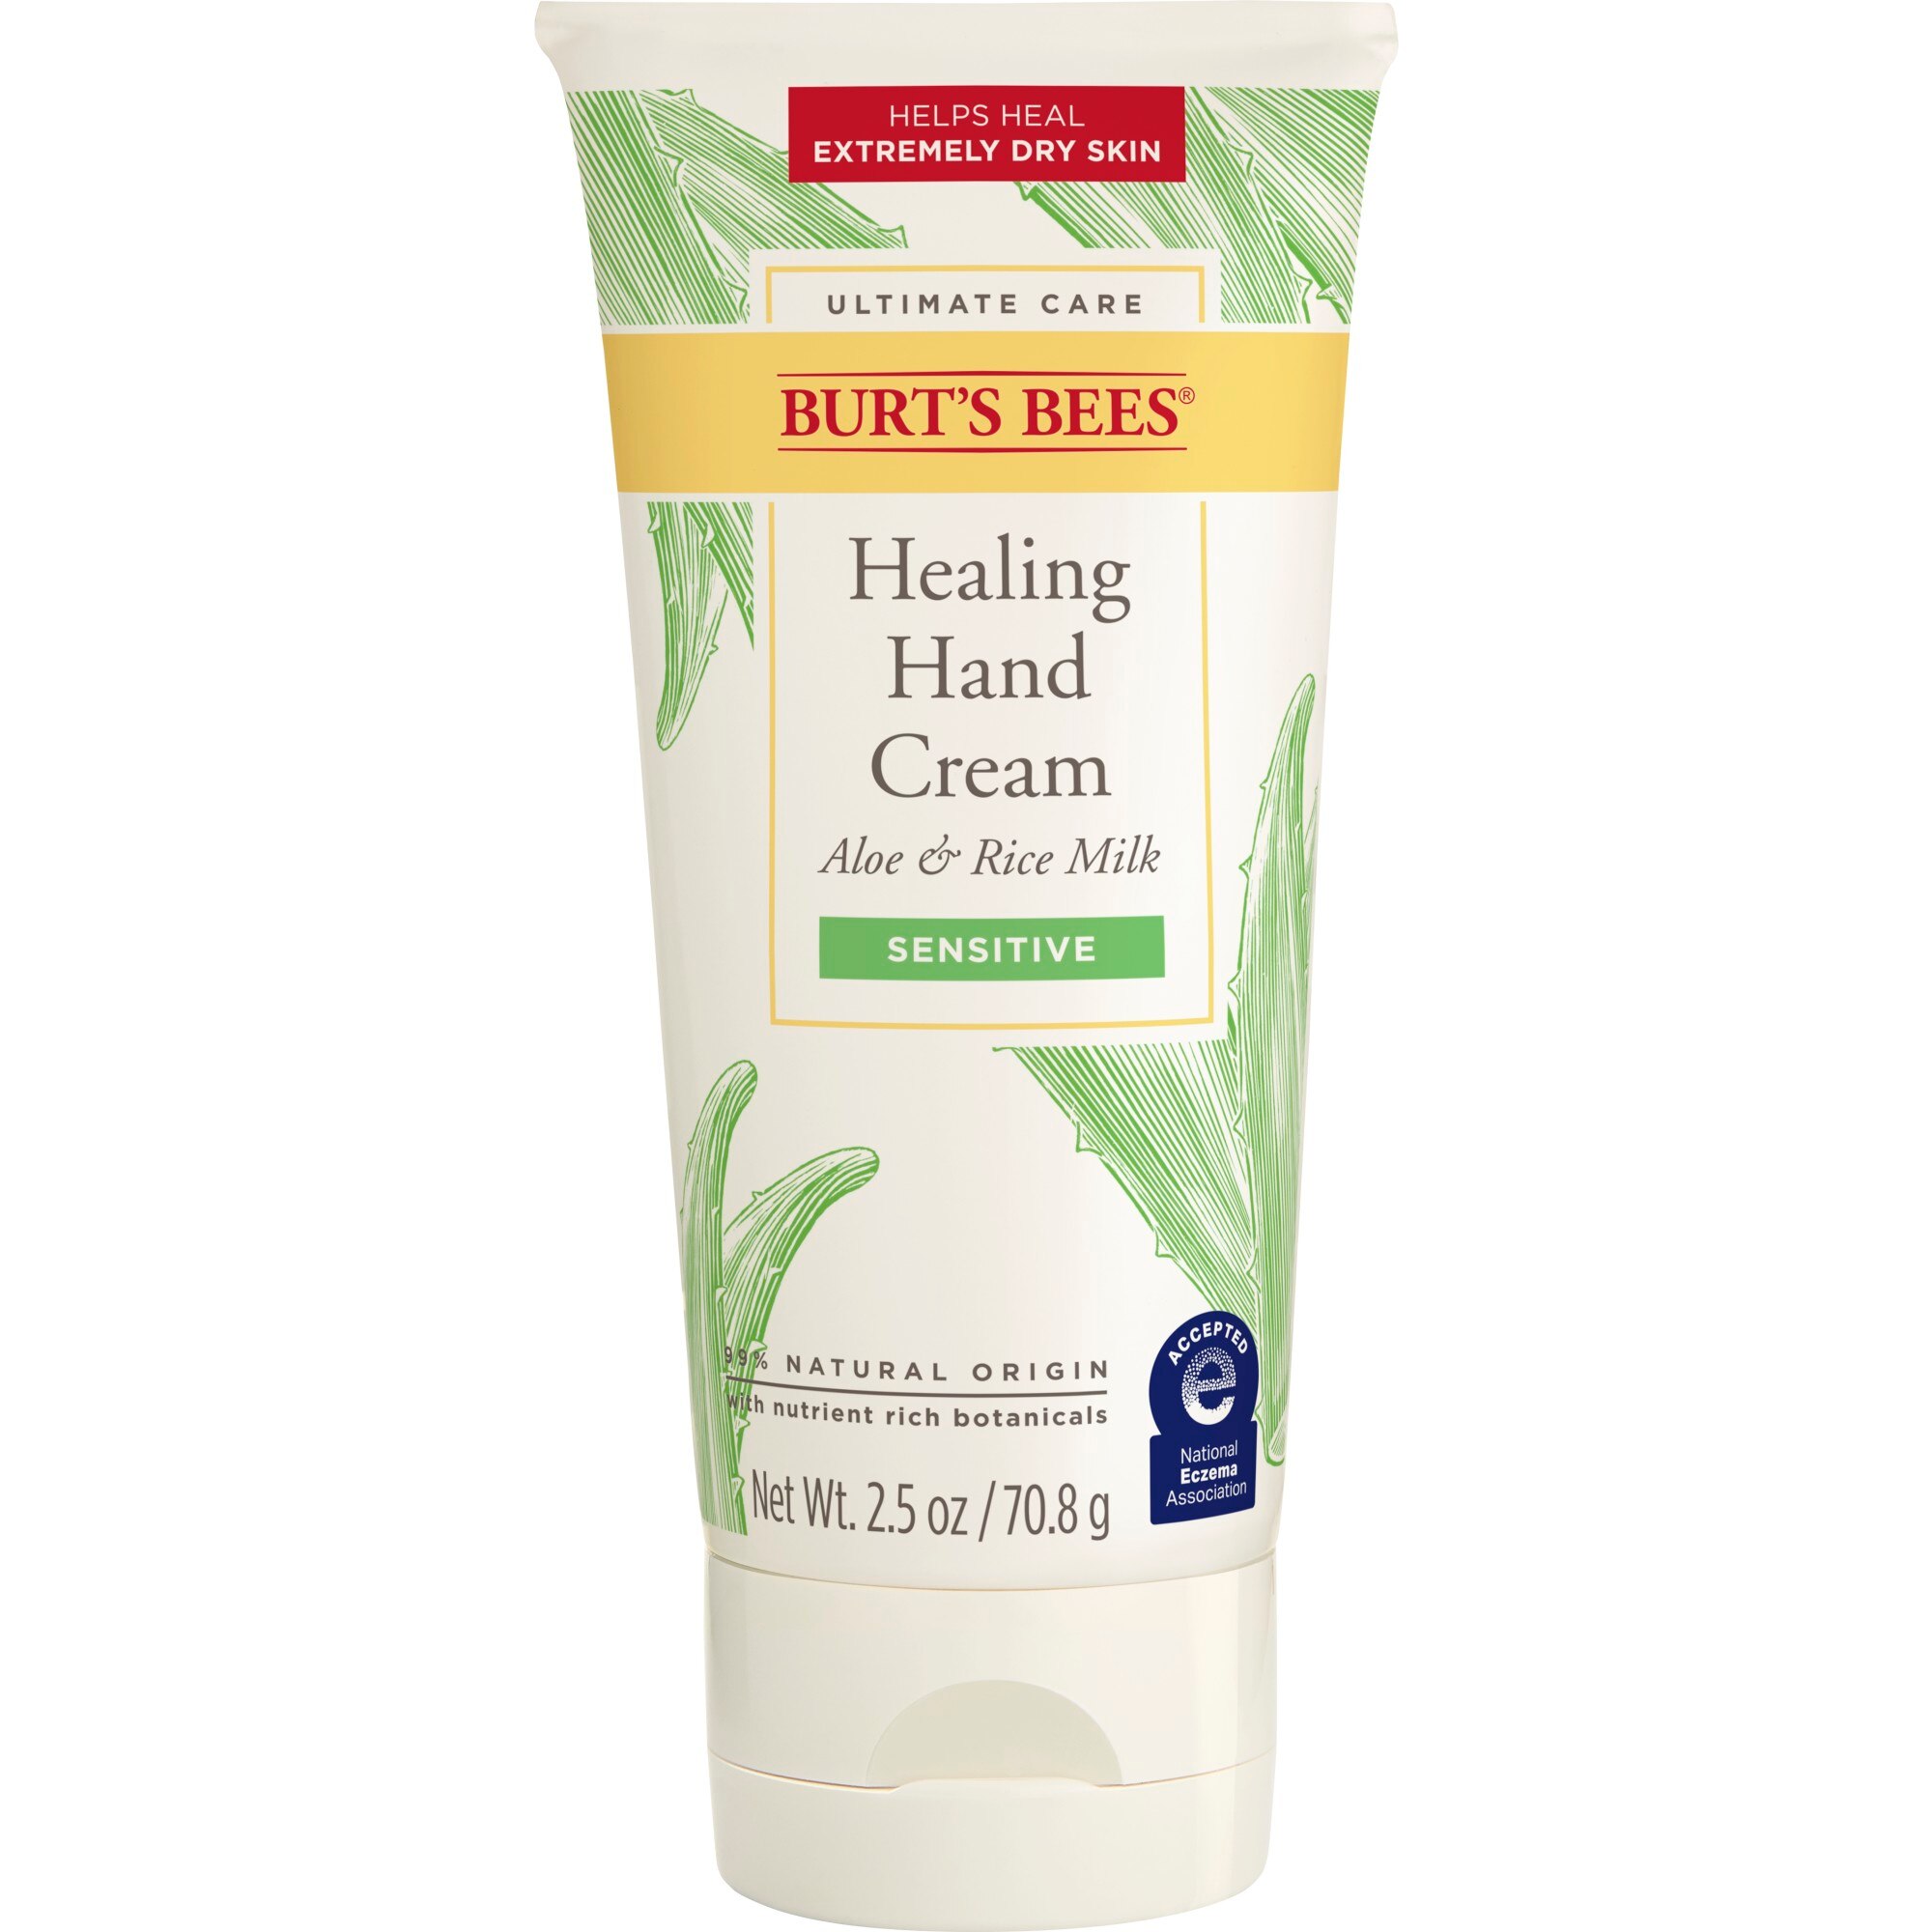 Burt's Bees Ultimate Care Healing Hand Cream With Aloe And Rice Milk For Sensitive Skin, 2.5 Oz , CVS